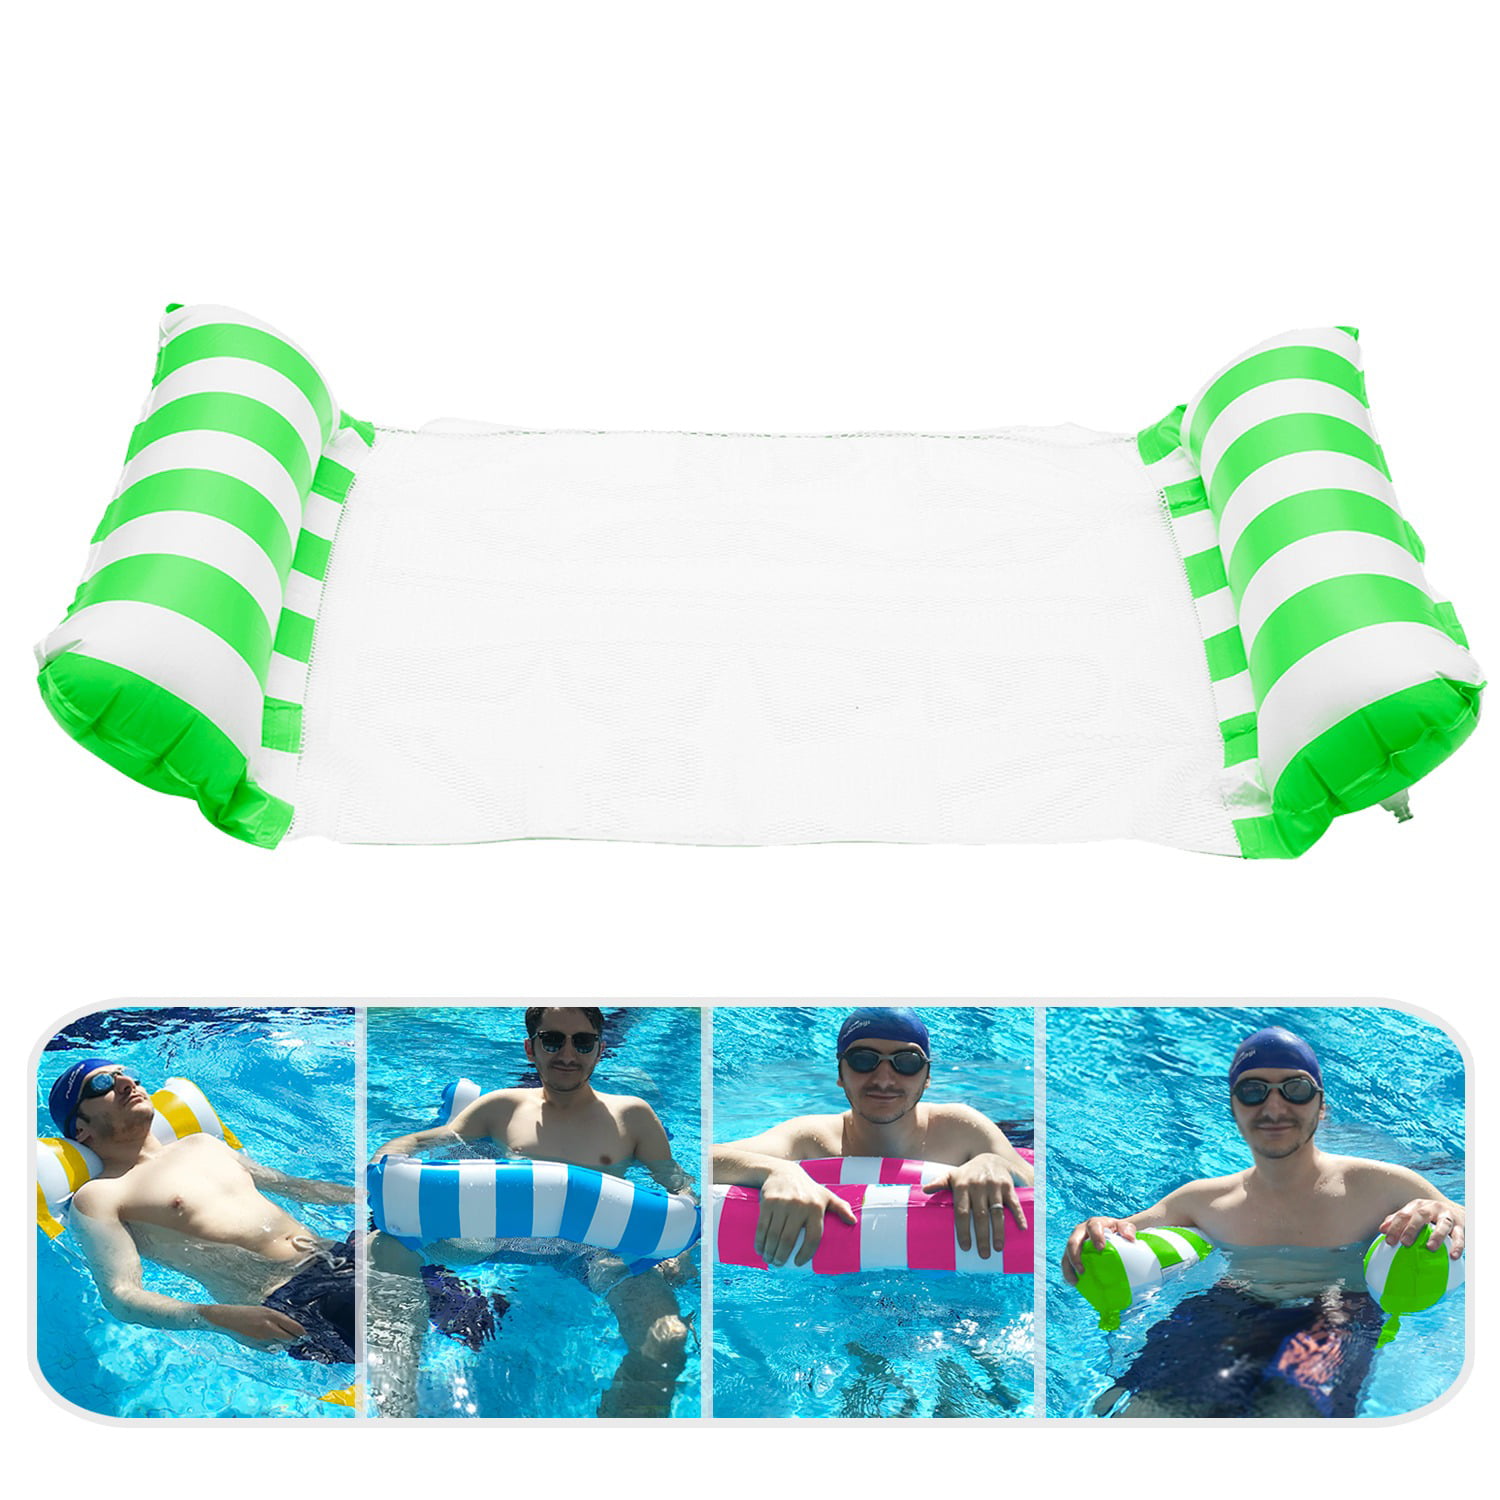 90/120cm Inflatable Pool Float Beach Swimming Lounger Peacock Shaped SwimmingToy 